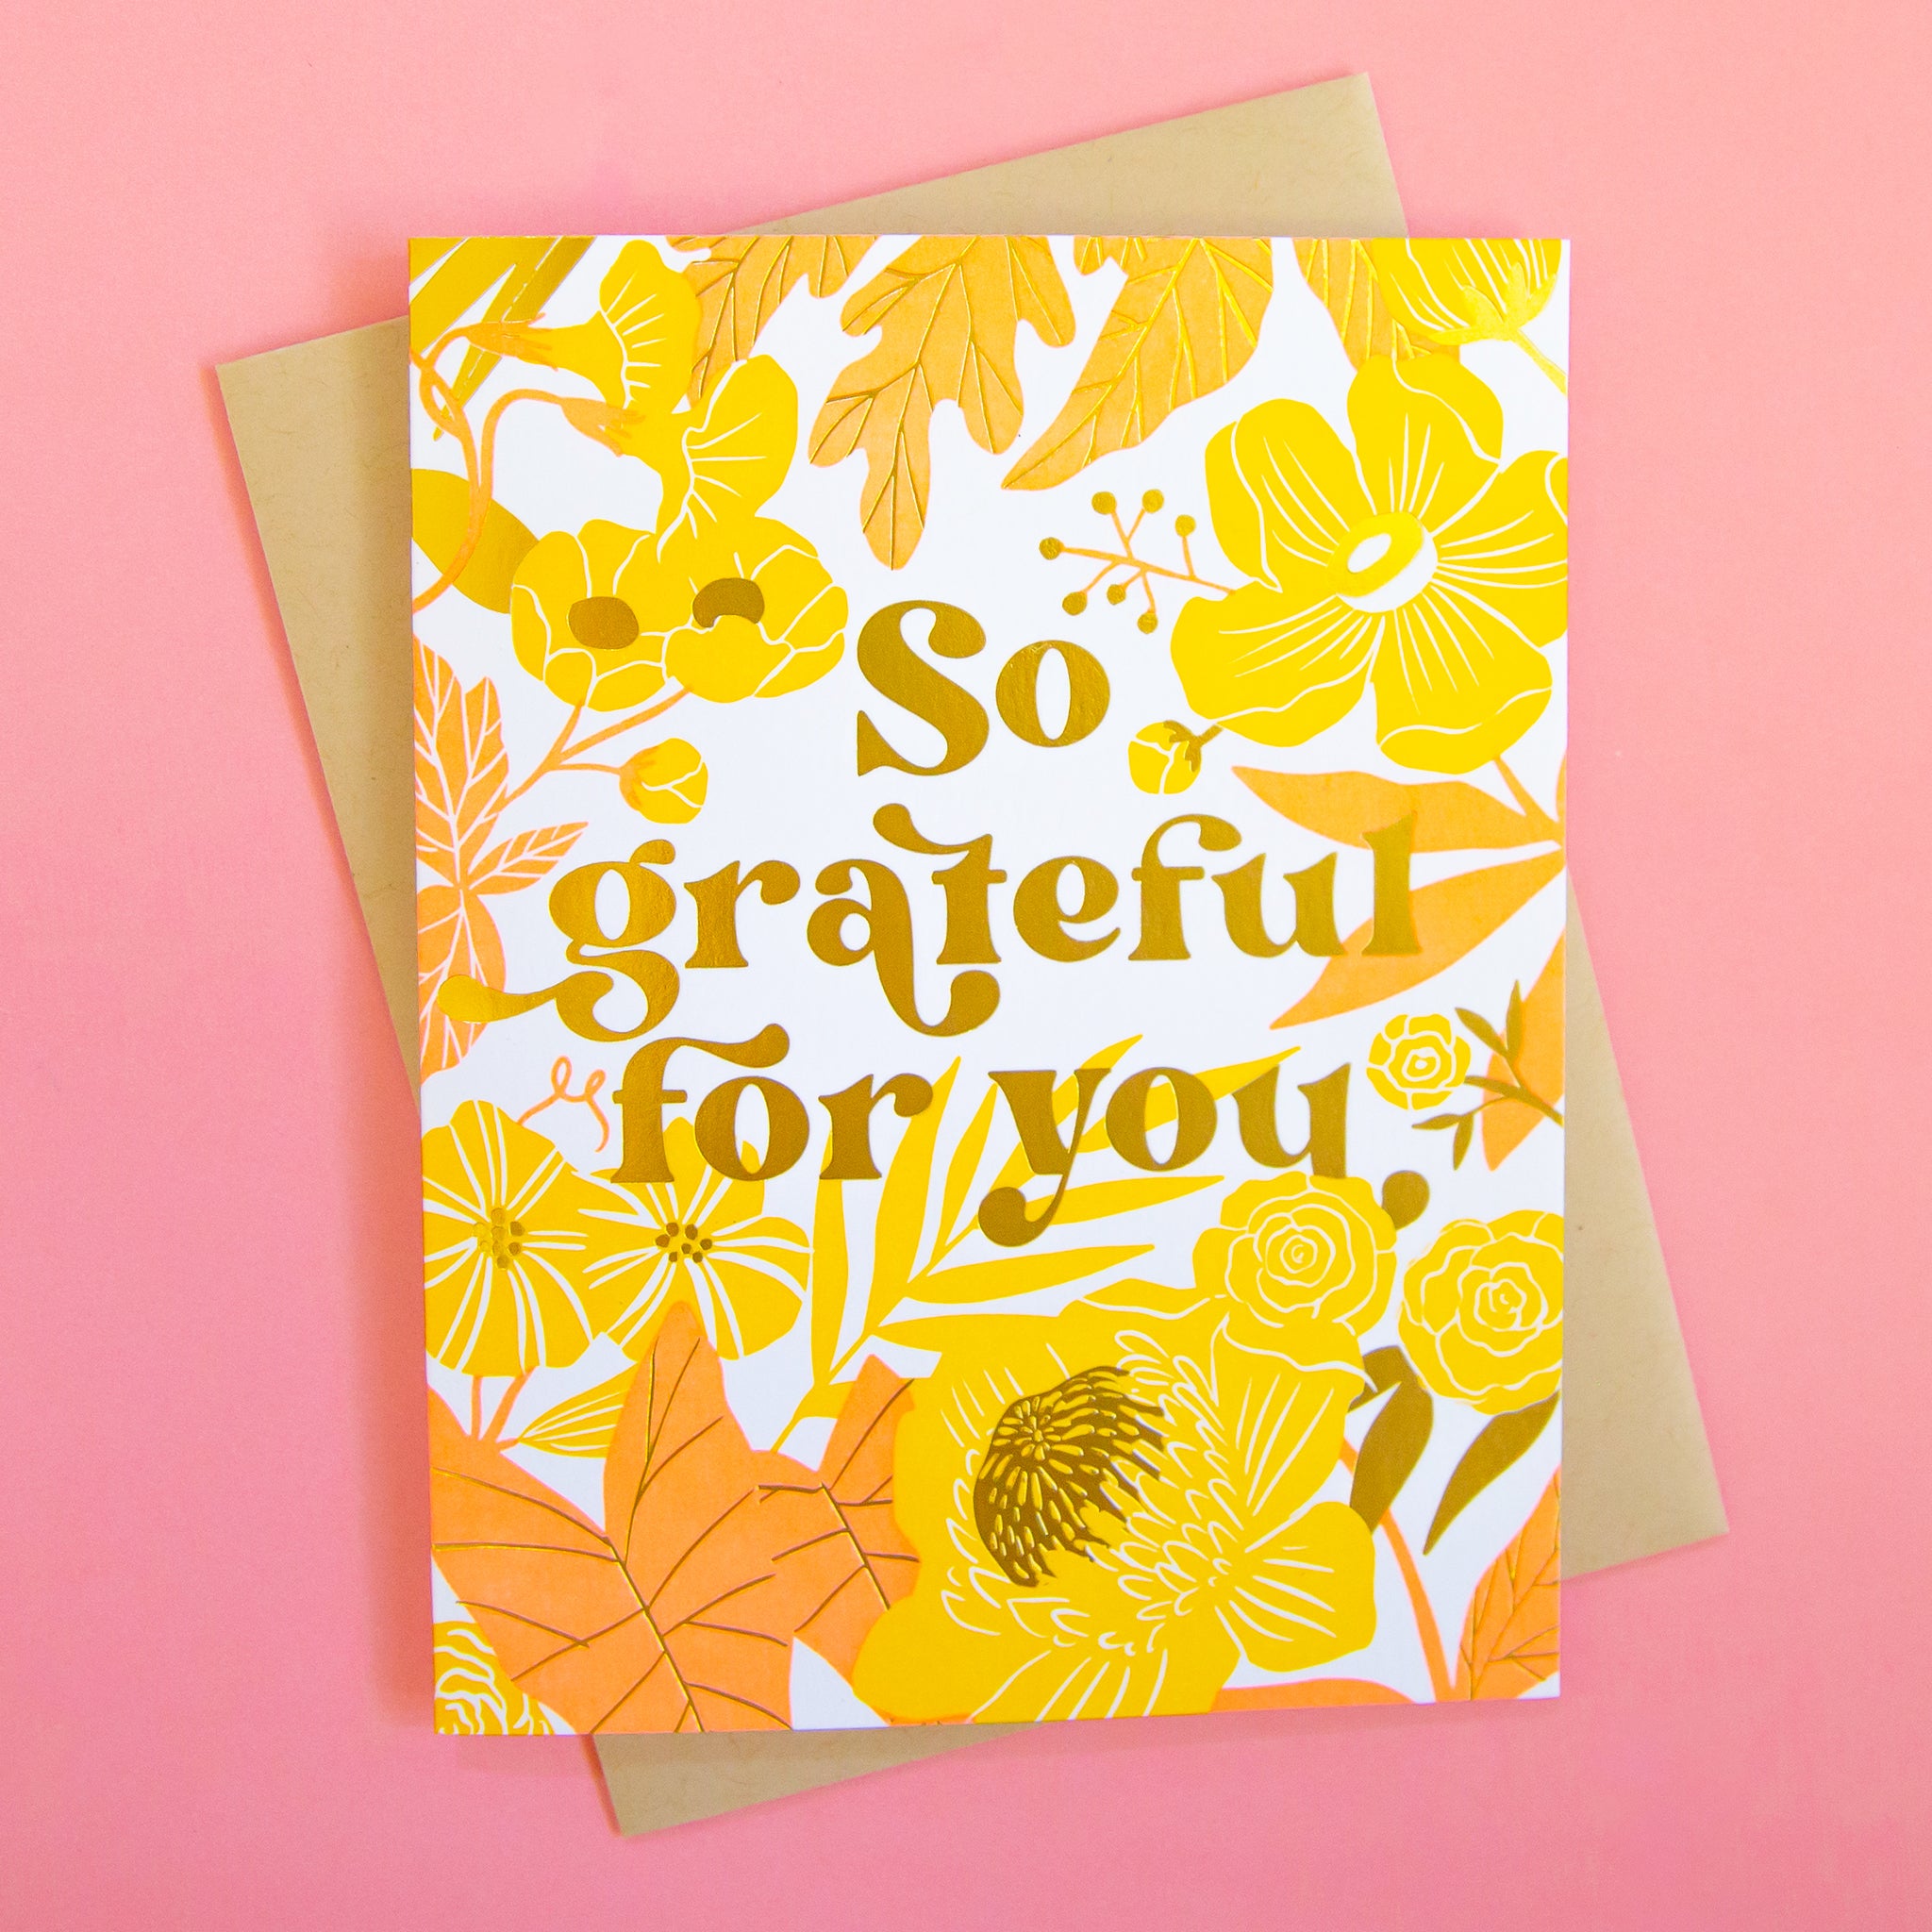 On a pink background is a yellow and pink floral card with gold foiled text that reads, "So grateful for you".